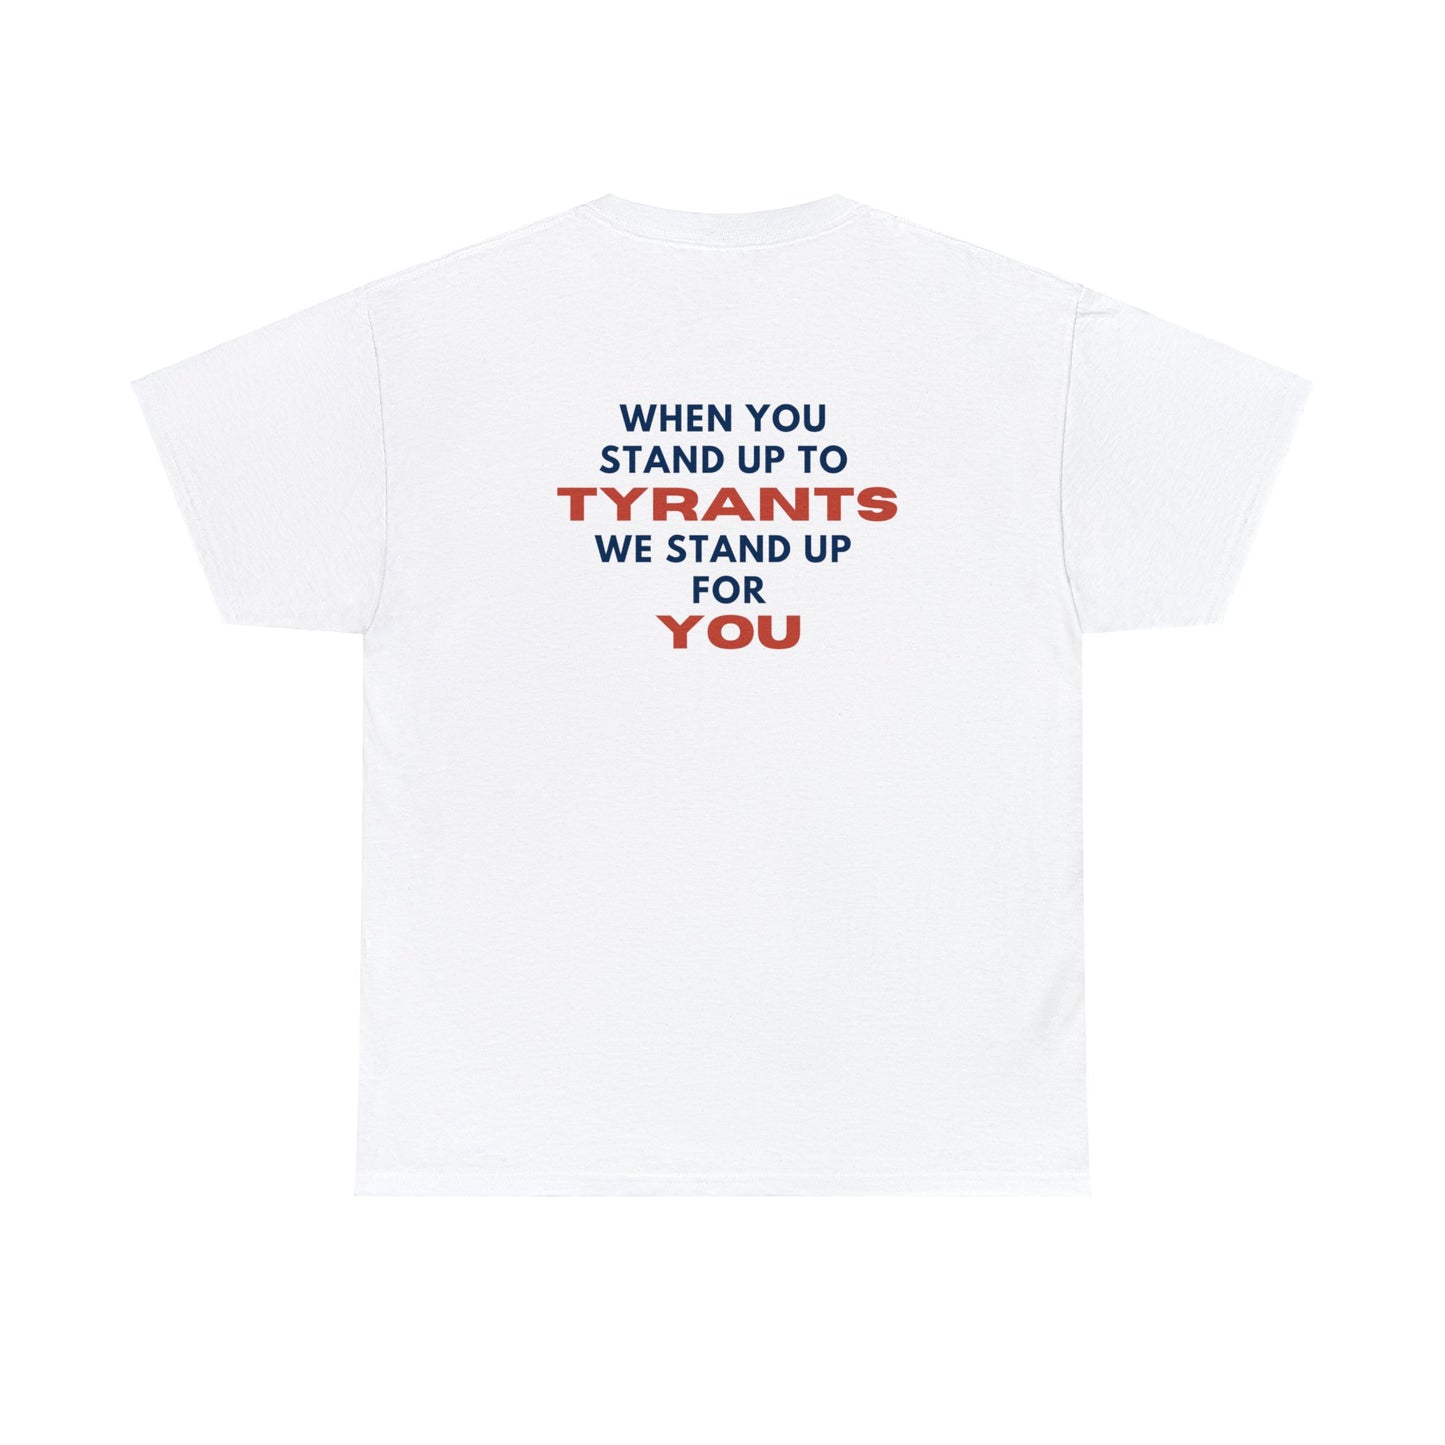 MEMBERS ONLY: Men's Stand up to Tyranny shirt